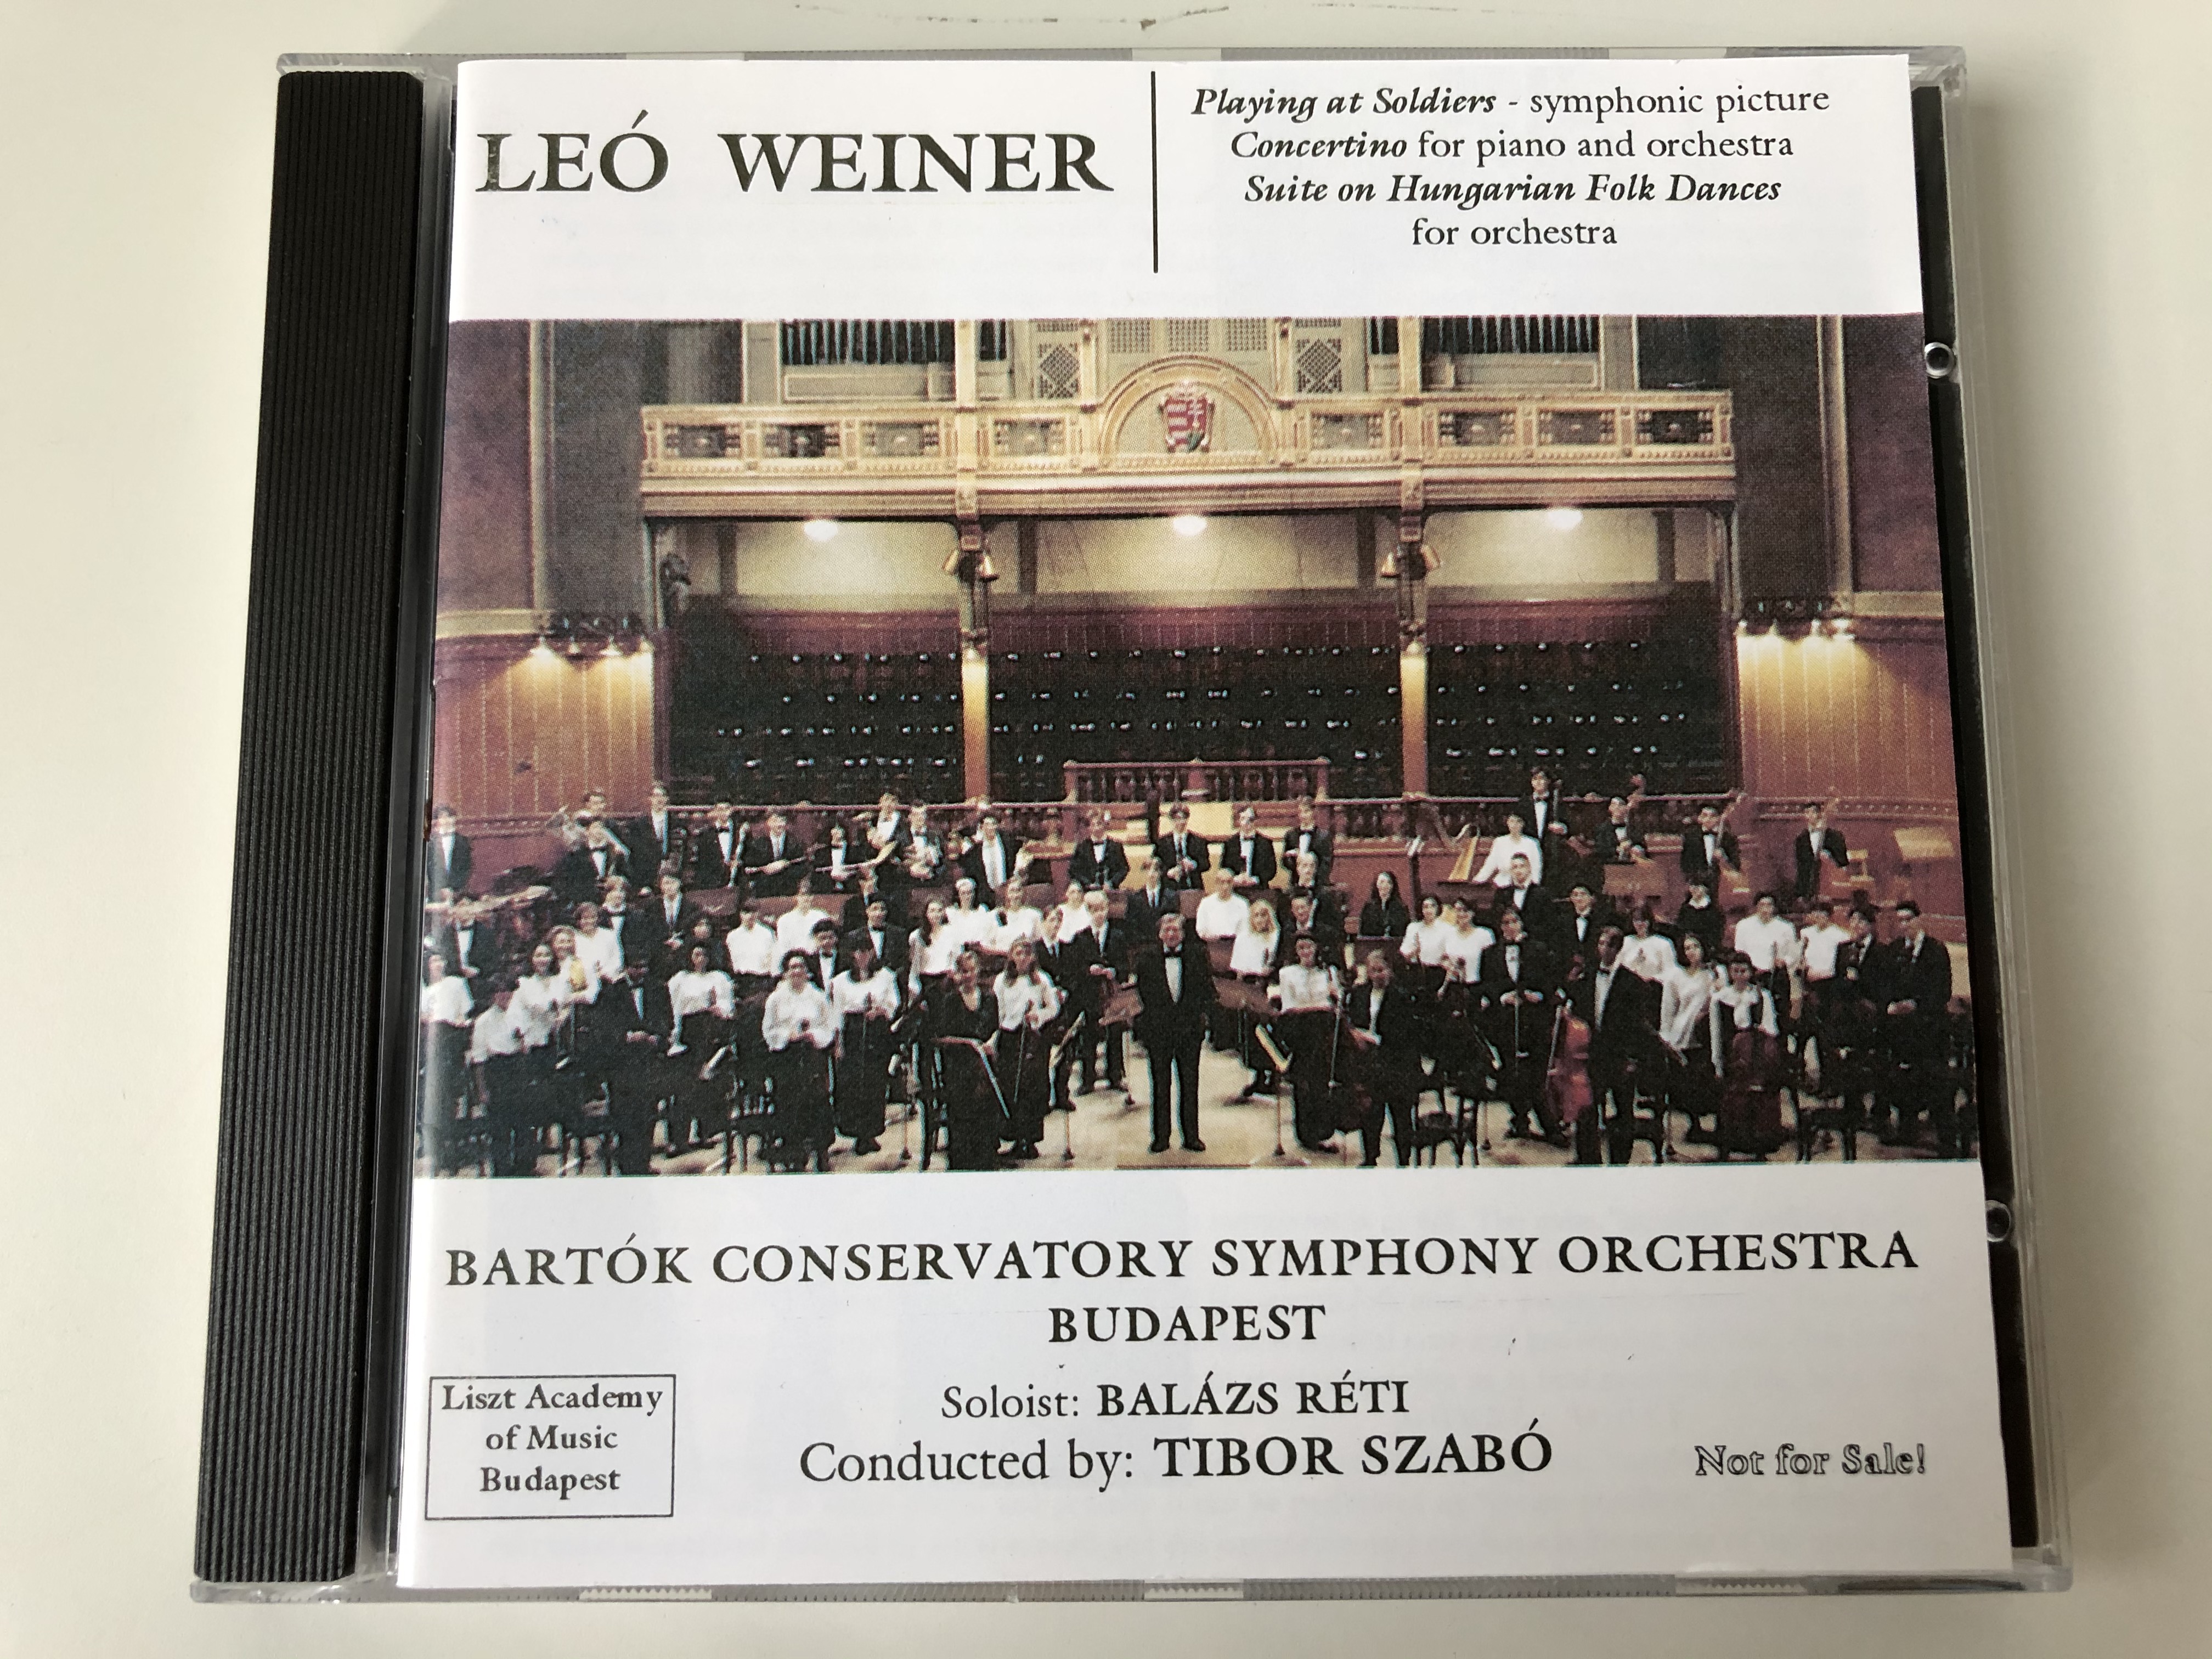 leo-weiner-playing-at-soldiers-symphonic-picture-concertino-for-piano-and-orchestra-suite-on-hungarian-folk-dances-for-orchestra-bartok-conservatory-symphony-orchestra-budapest-soloist-bala-1-.jpg